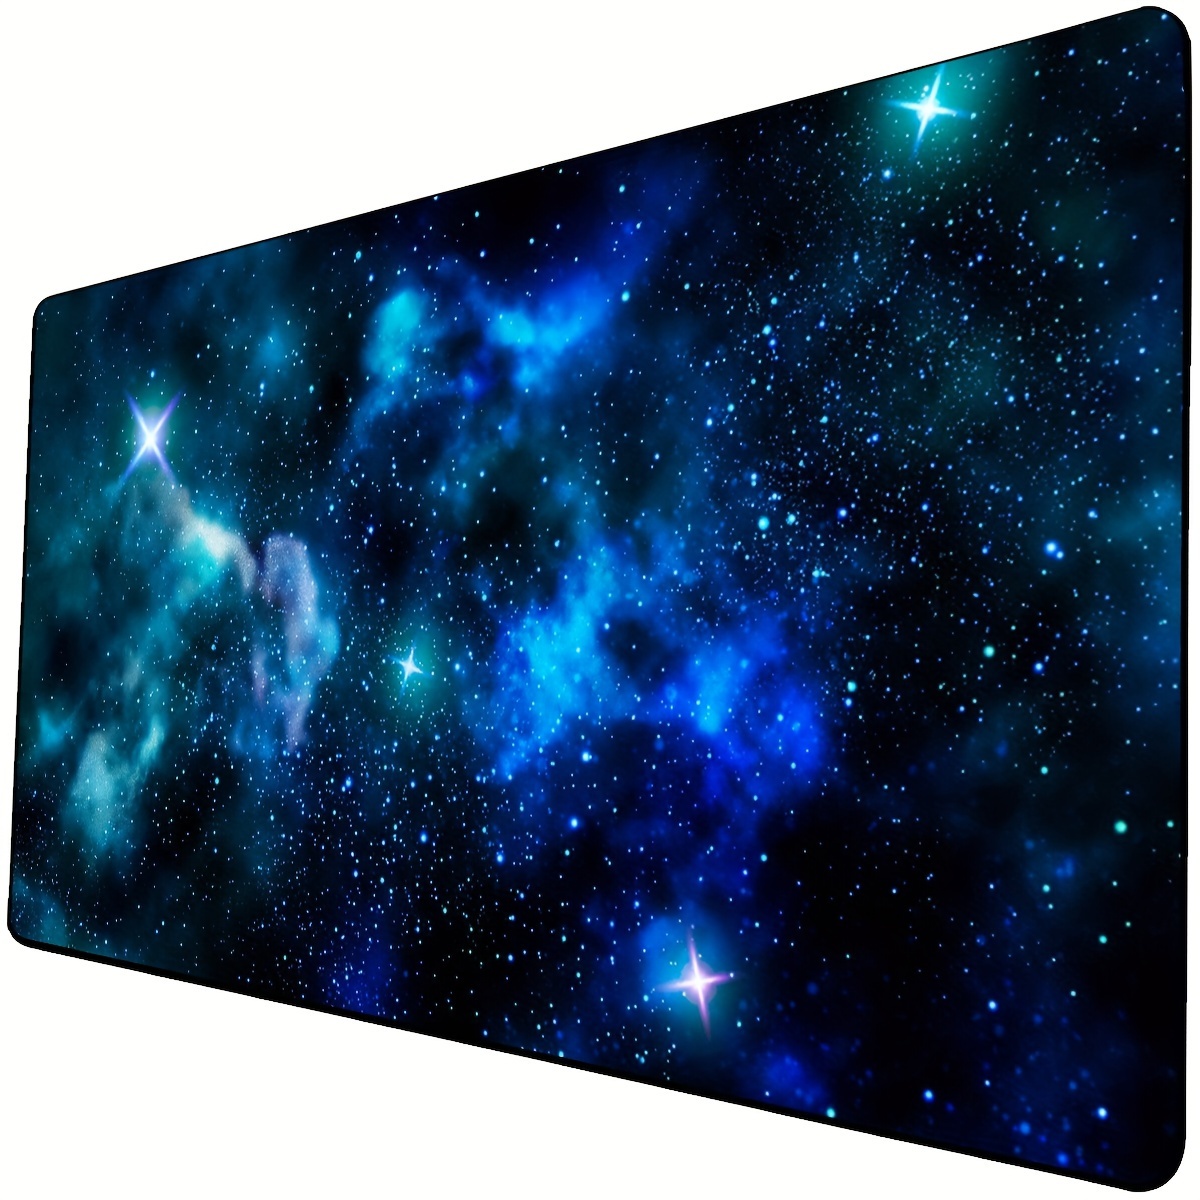 

1pc Mouse Mat, Waterproof Mat, Office Desk Mat, Laptop Writing Desk Mat, Starry Sky Printing Table Mat, Game Table Mat, Opening School Items, Holiday Gift